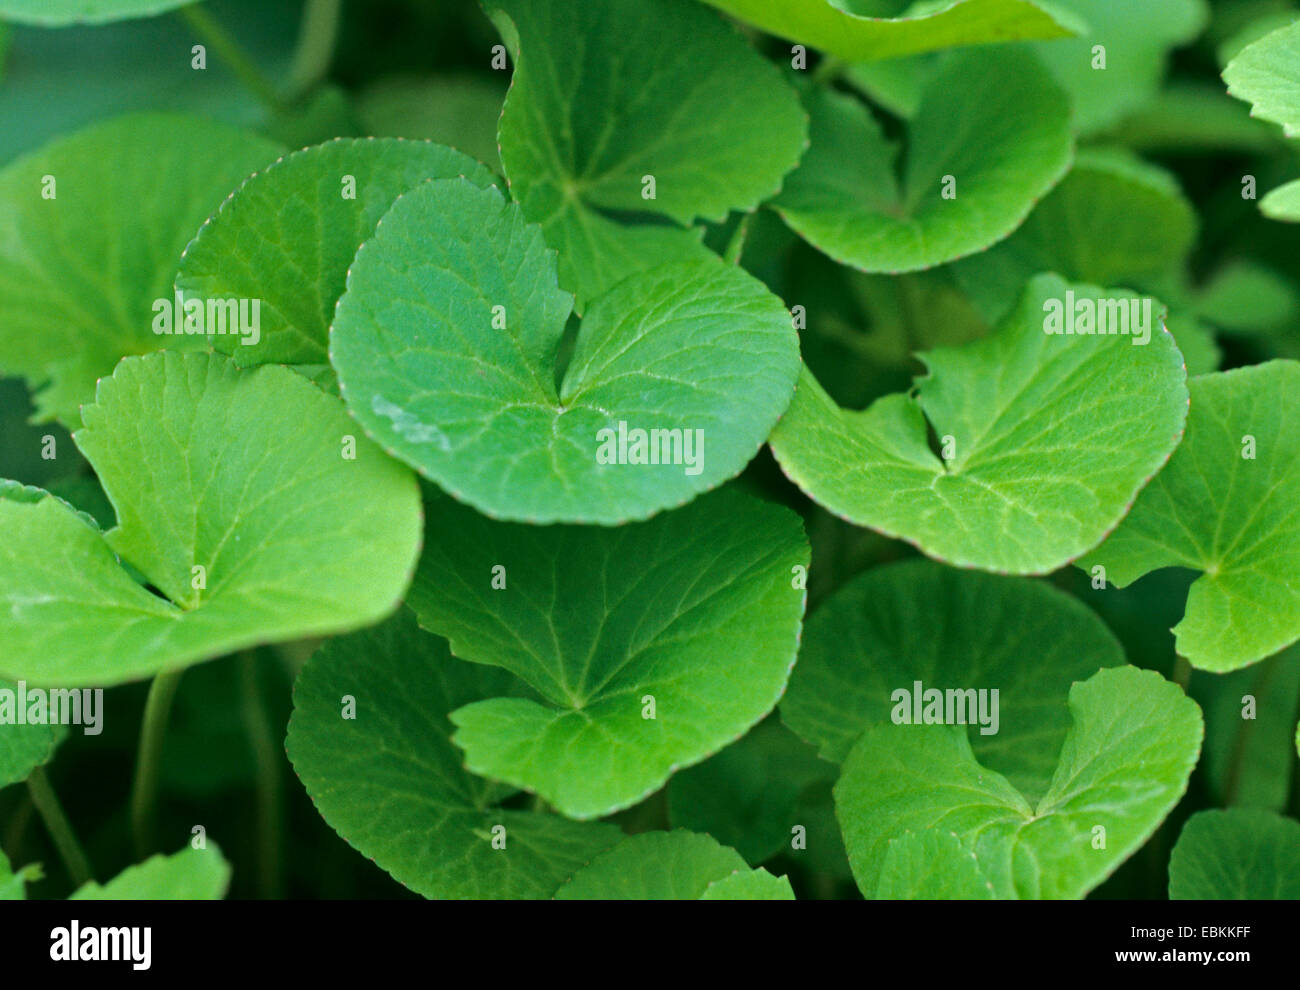 pennyweed (Centella asiatica), leaves Stock Photo